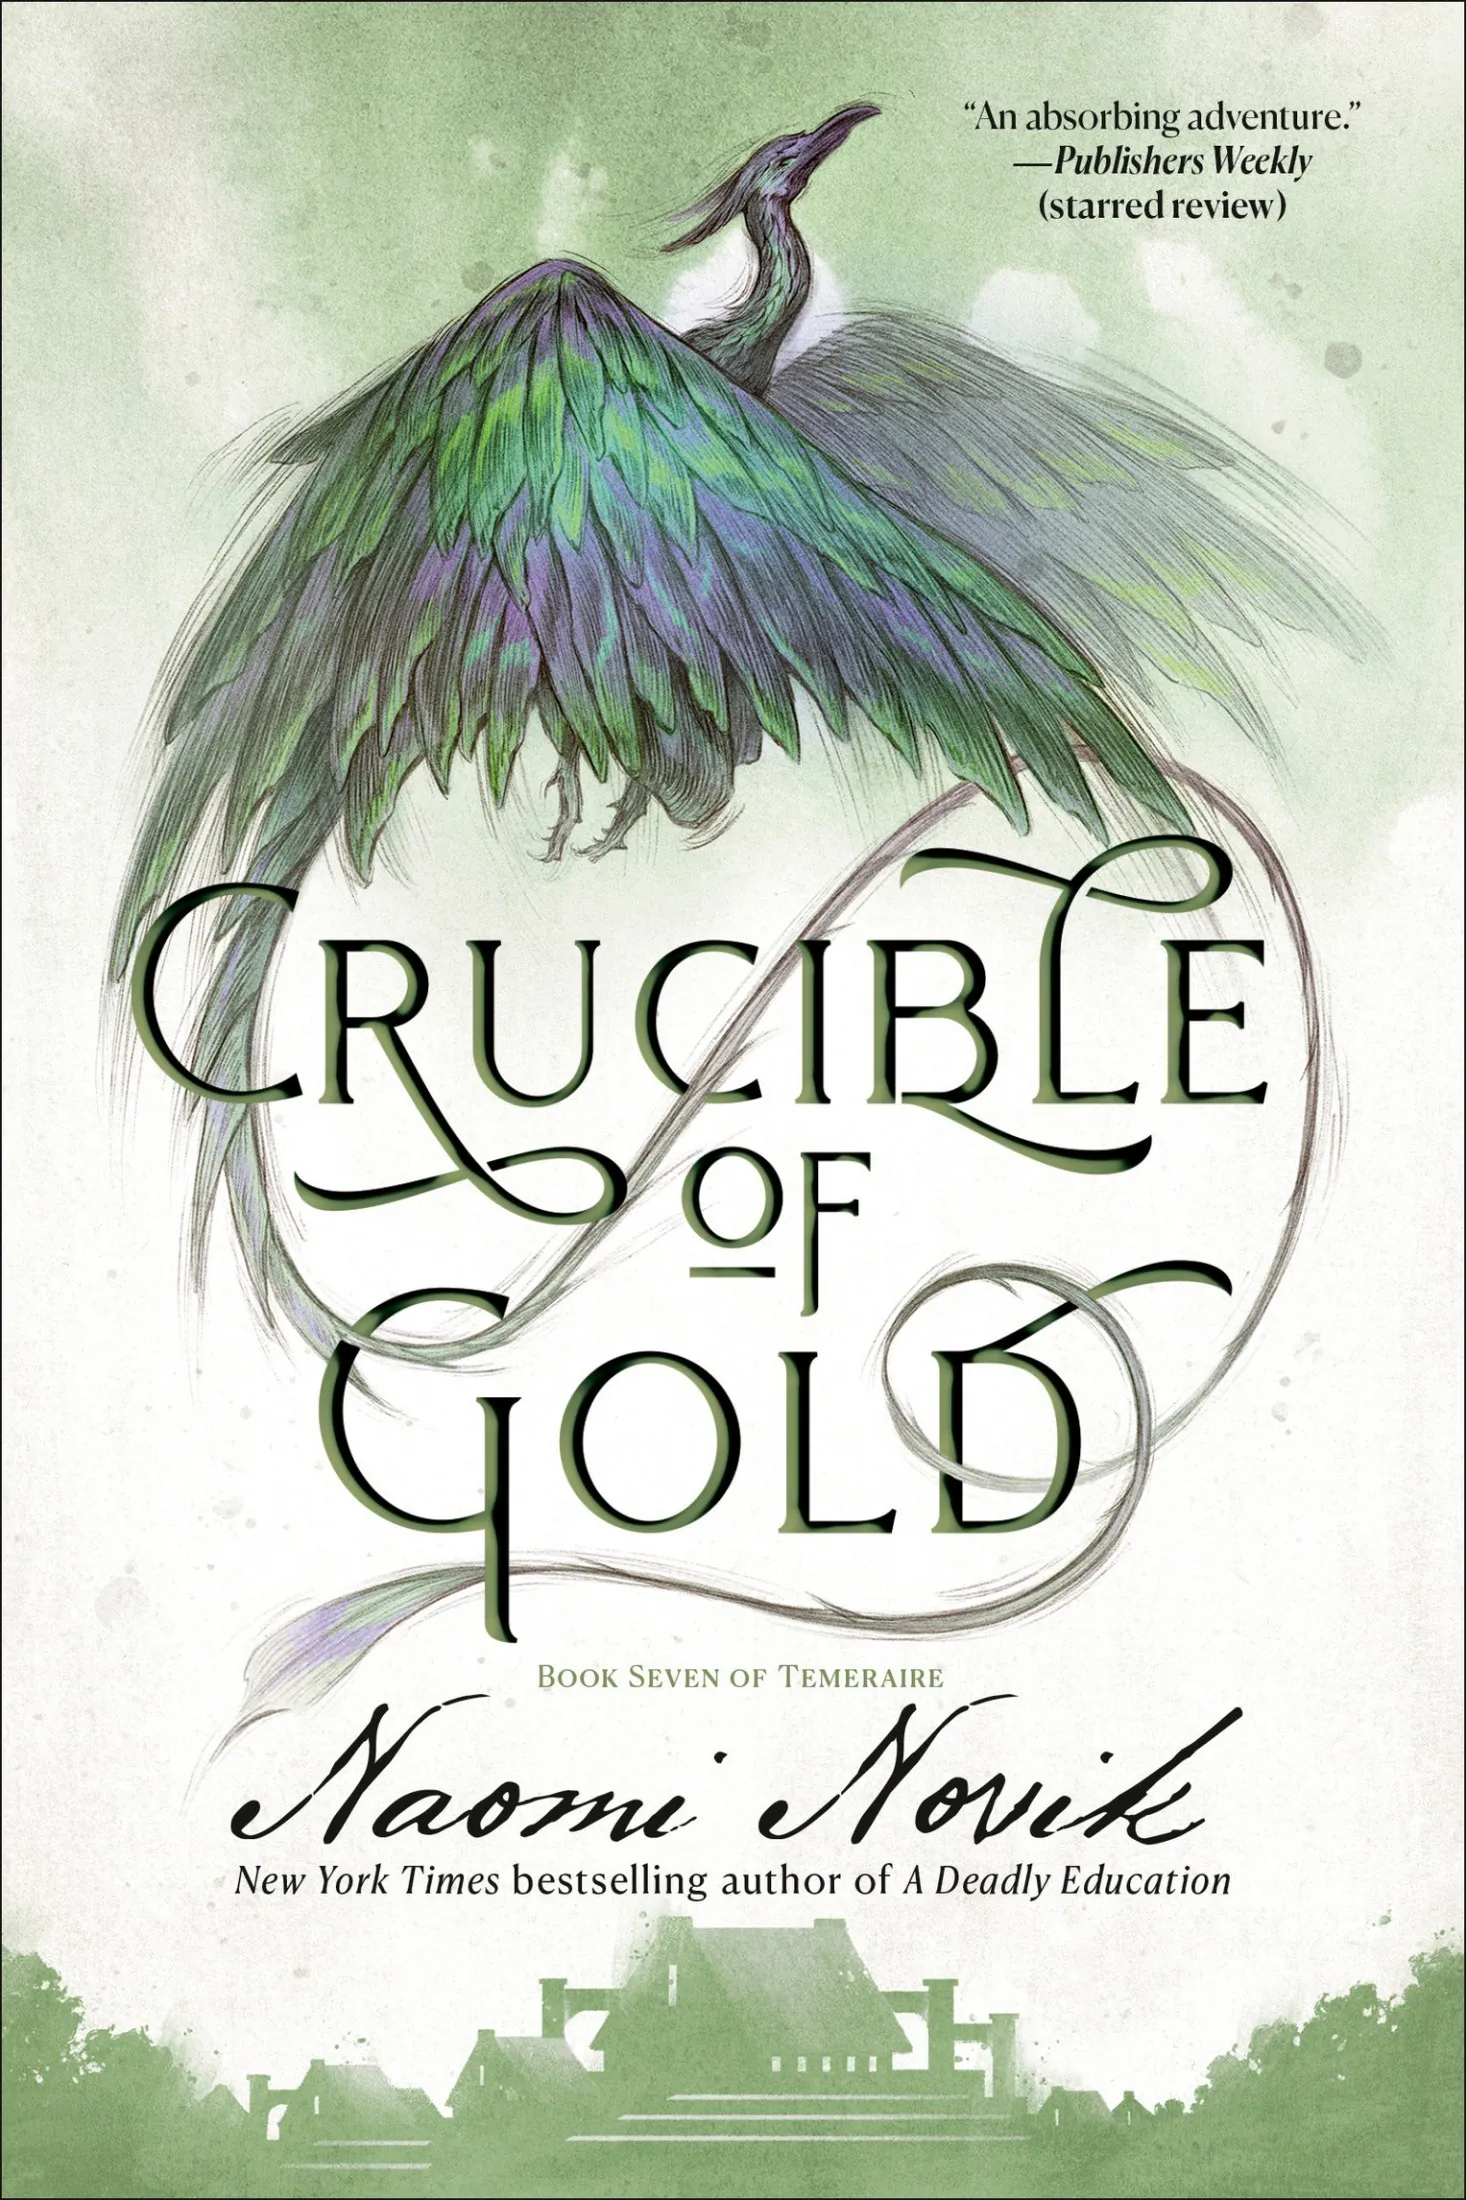 Crucible of Gold (Temeraire #7)